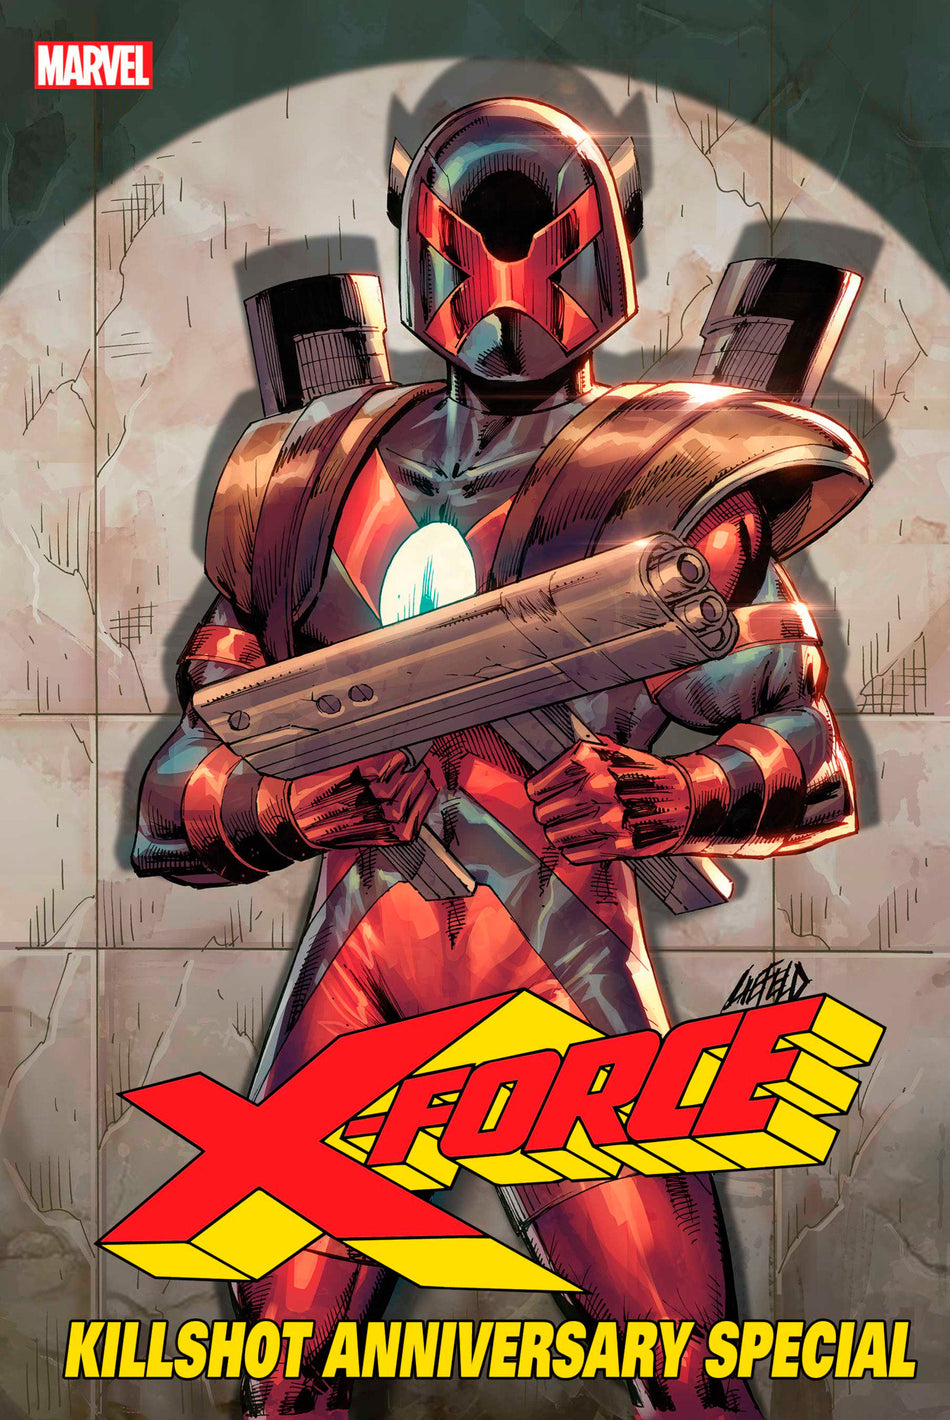 Image of X-Force: Killshot Anniversary Special 1 Liefeld Connecting Variant C comic sold by Stronghold Collectibles.